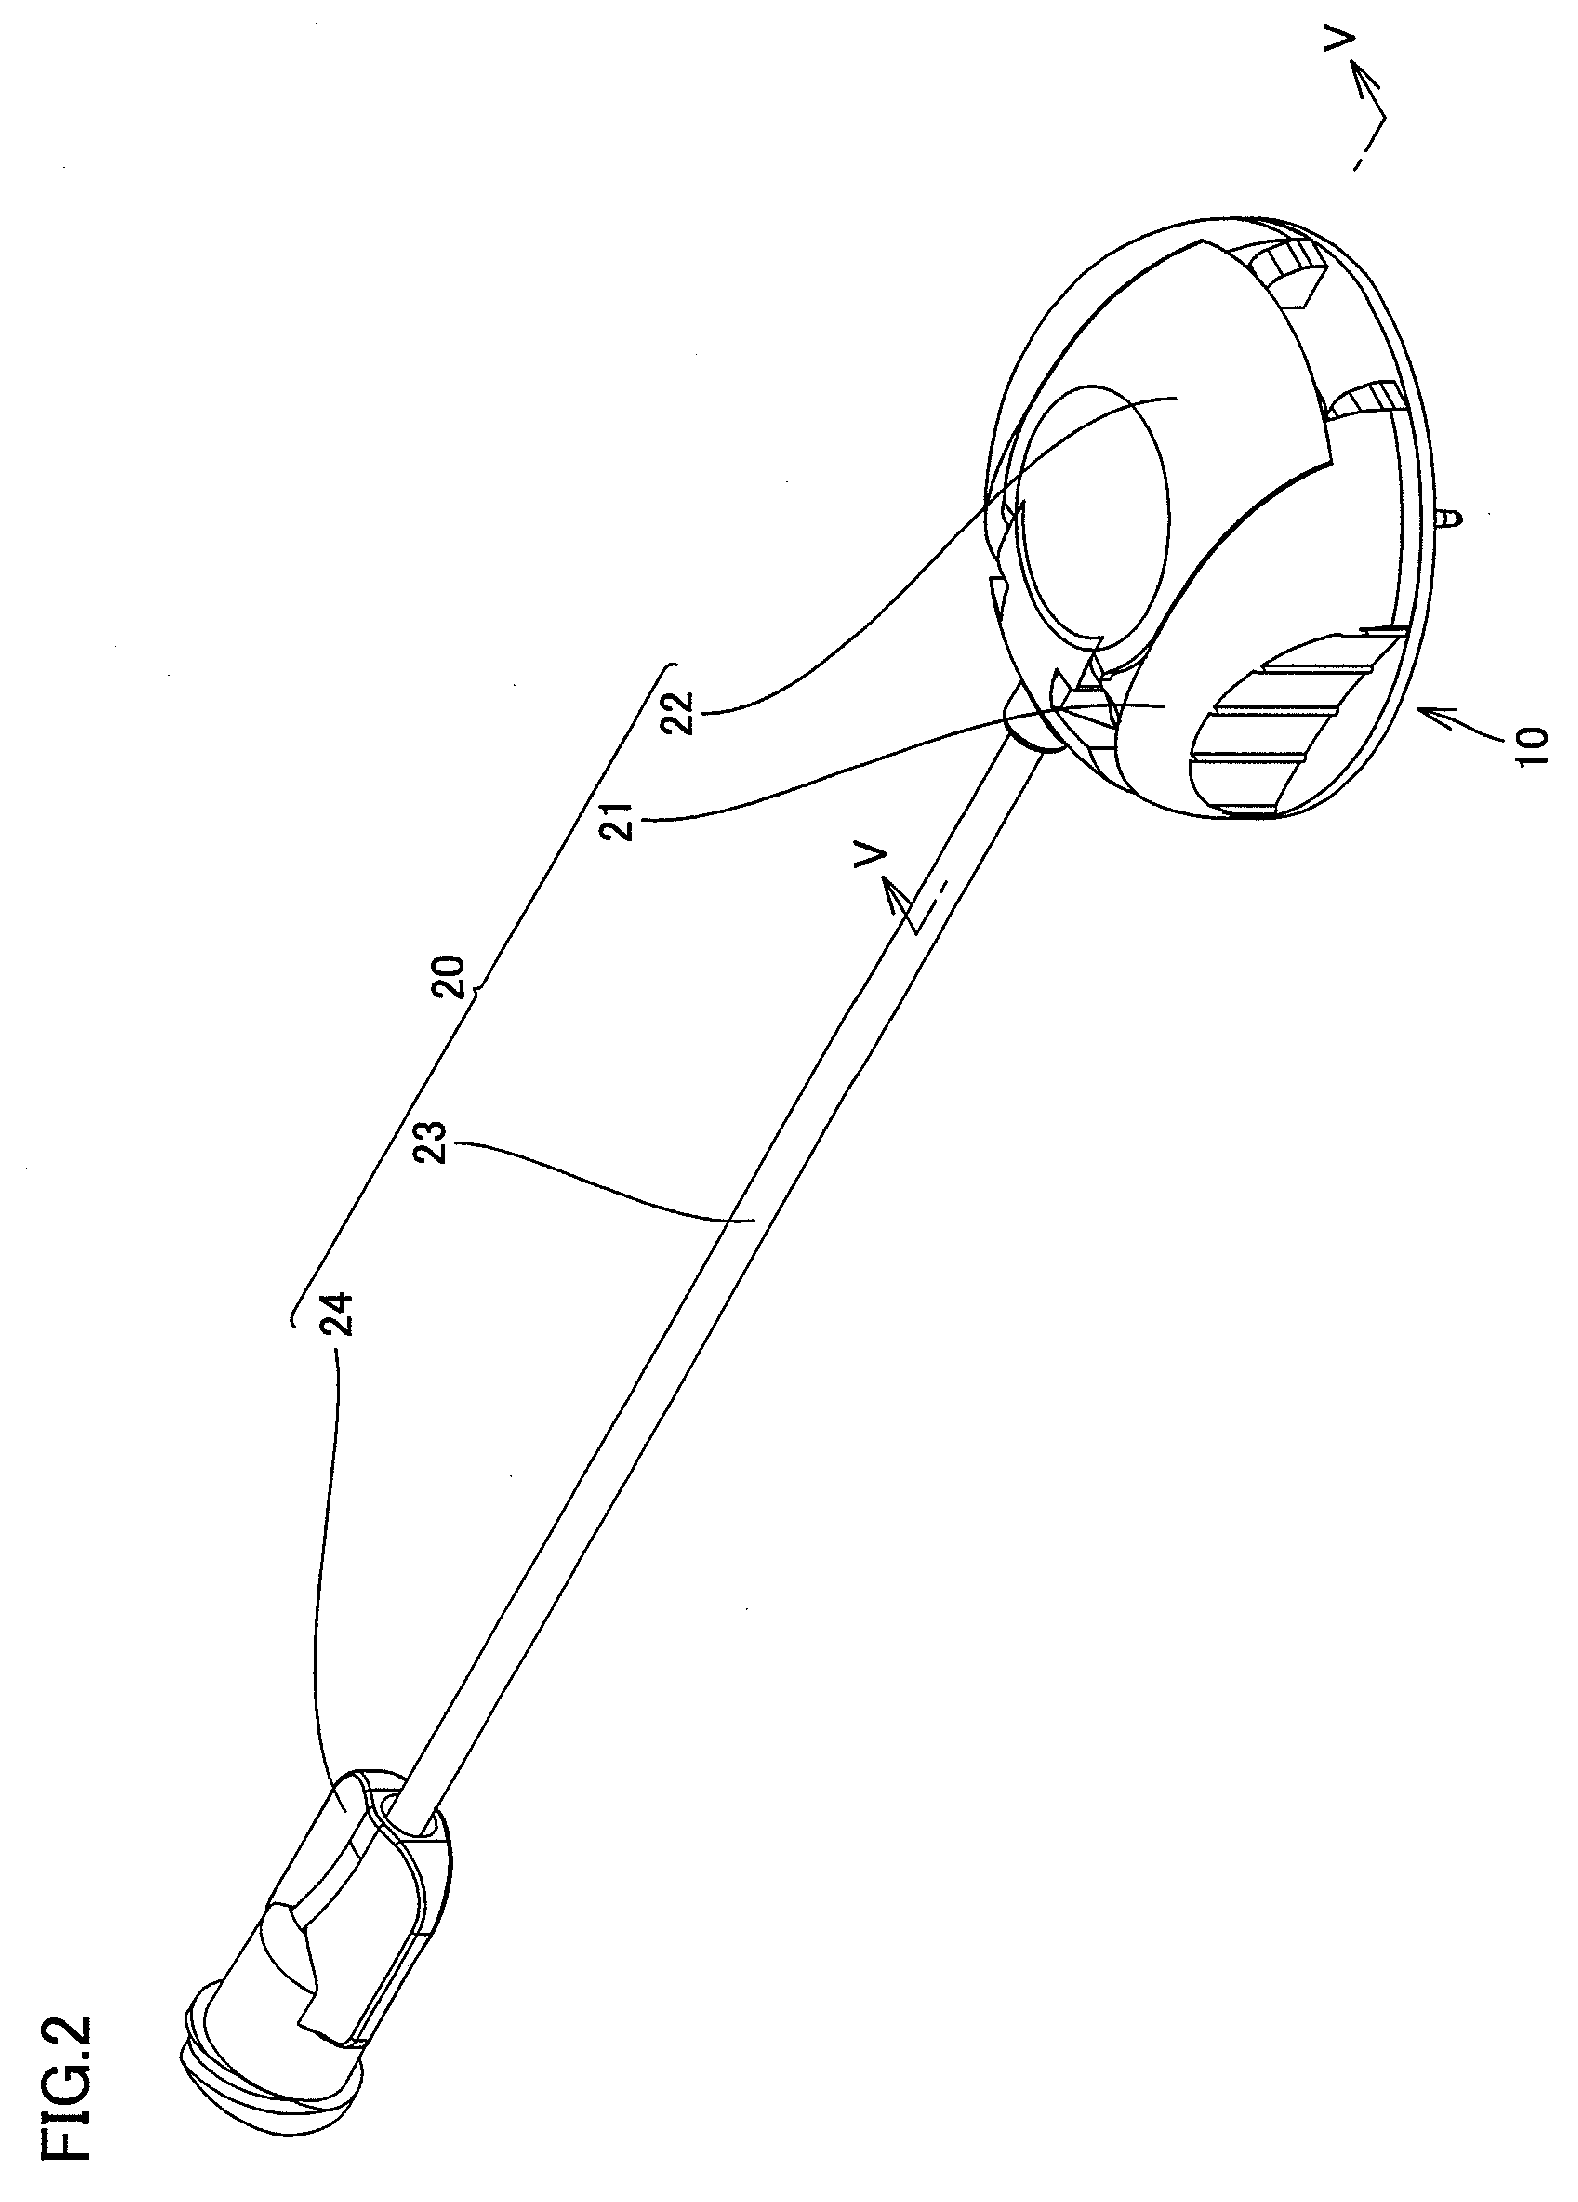 Subcutaneous infusion device